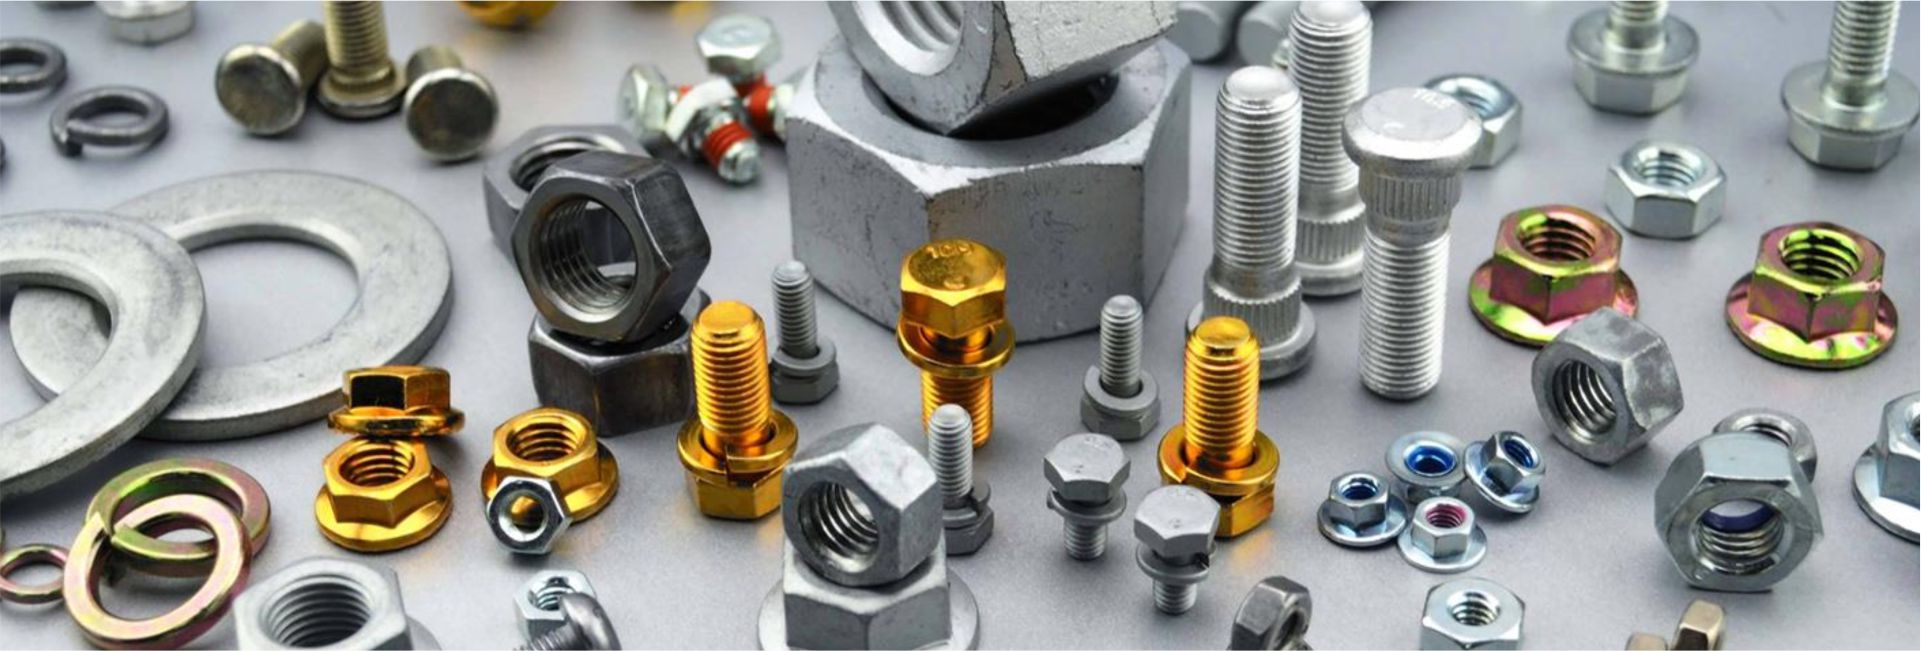 Nut Bolts Manufacturers in Ludhiana Punjab India